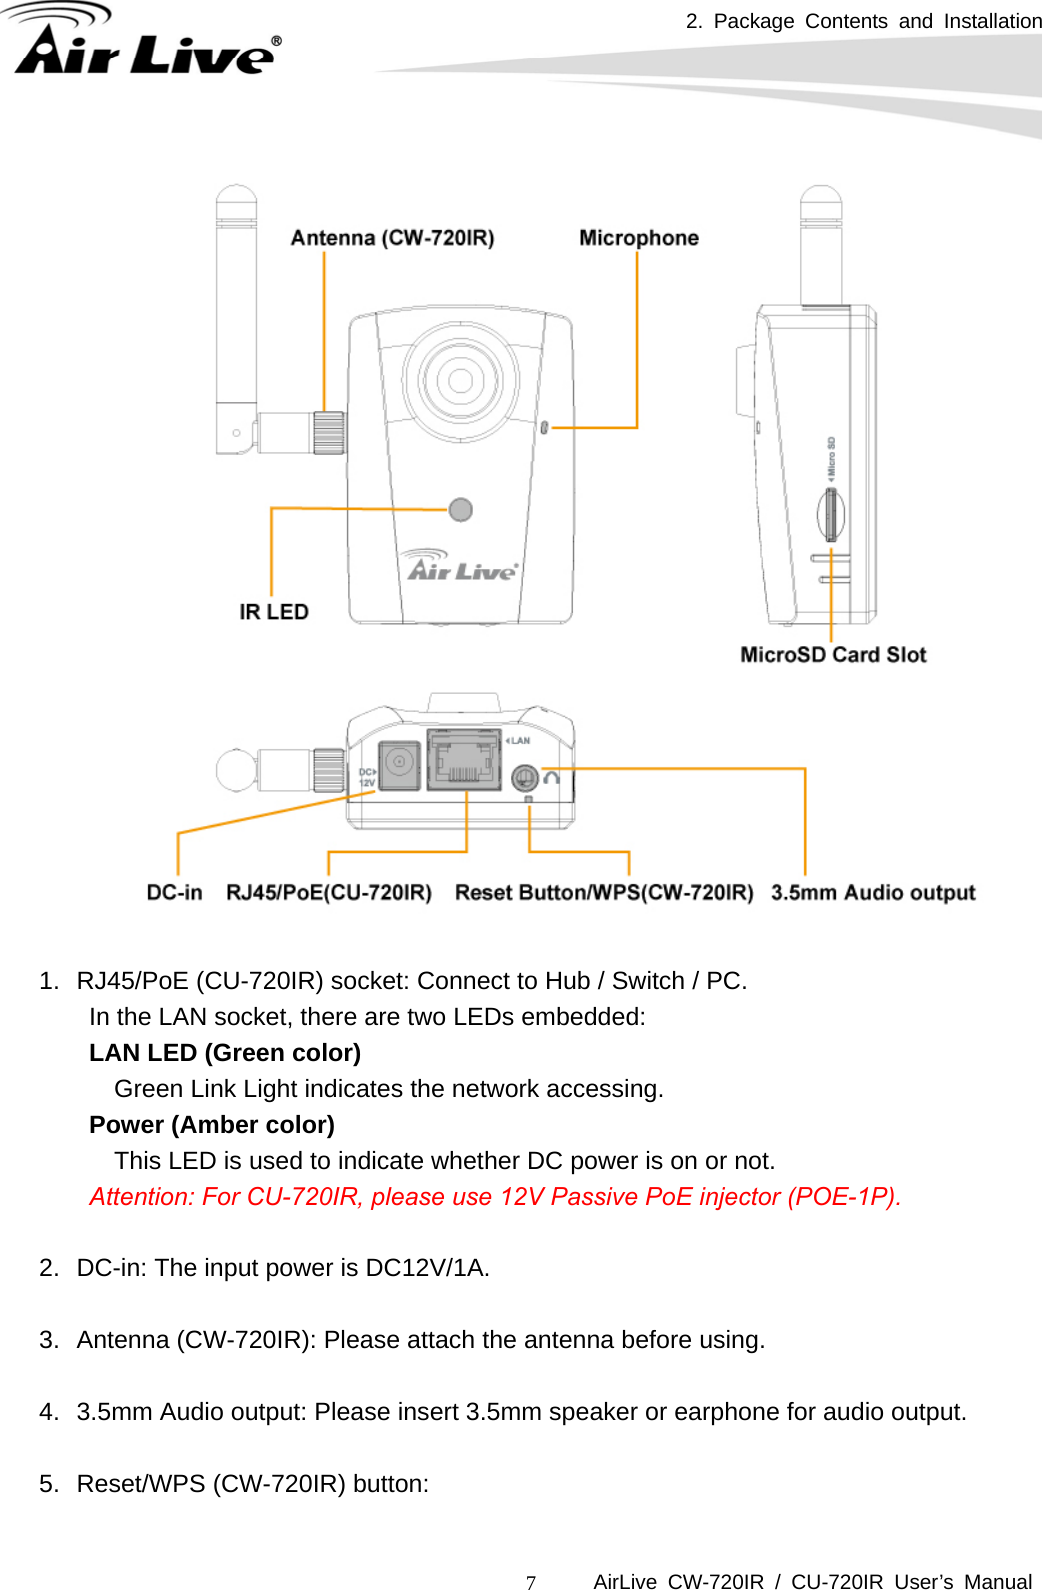 2. Package Contents and Installation      AirLive CW-720IR / CU-720IR User’s Manual 7   1.  RJ45/PoE (CU-720IR) socket: Connect to Hub / Switch / PC. In the LAN socket, there are two LEDs embedded: LAN LED (Green color) Green Link Light indicates the network accessing. Power (Amber color) This LED is used to indicate whether DC power is on or not.       Attention: For CU-720IR, please use 12V Passive PoE injector (POE-1P).  2.  DC-in: The input power is DC12V/1A.  3.  Antenna (CW-720IR): Please attach the antenna before using.  4.  3.5mm Audio output: Please insert 3.5mm speaker or earphone for audio output.  5.  Reset/WPS (CW-720IR) button:    